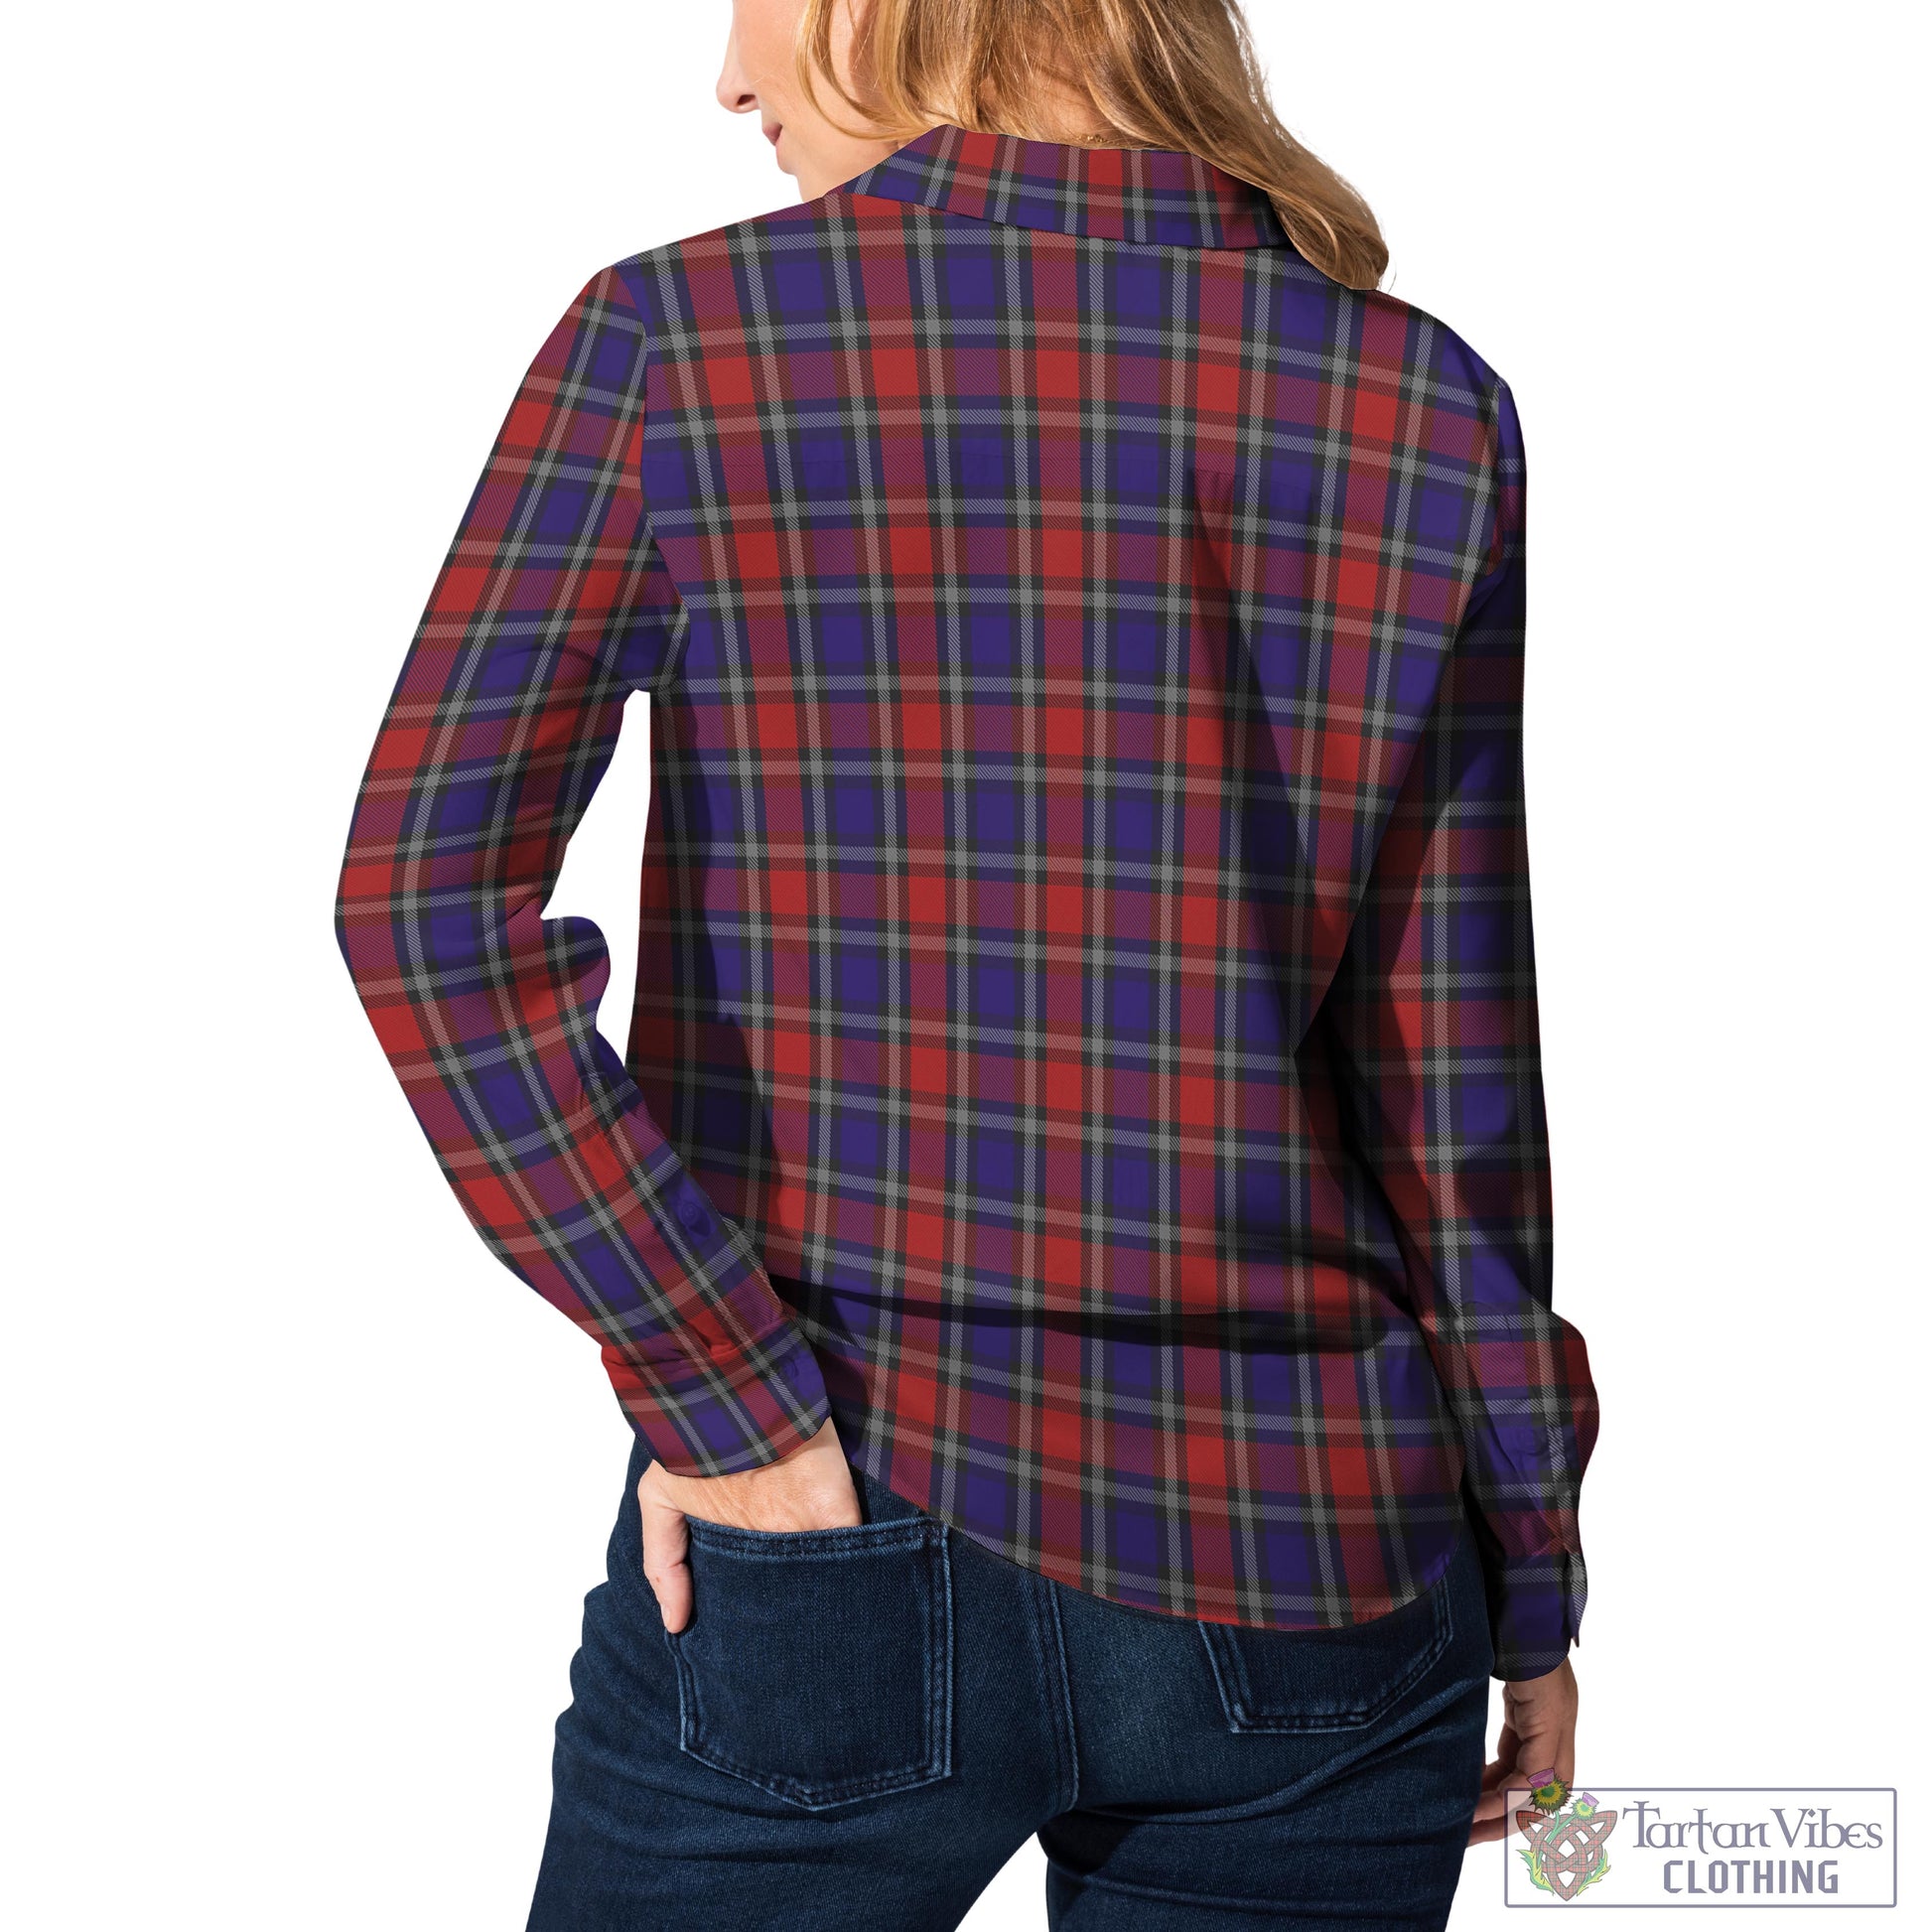 Tartan Vibes Clothing Clark Red Tartan Womens Casual Shirt with Family Crest